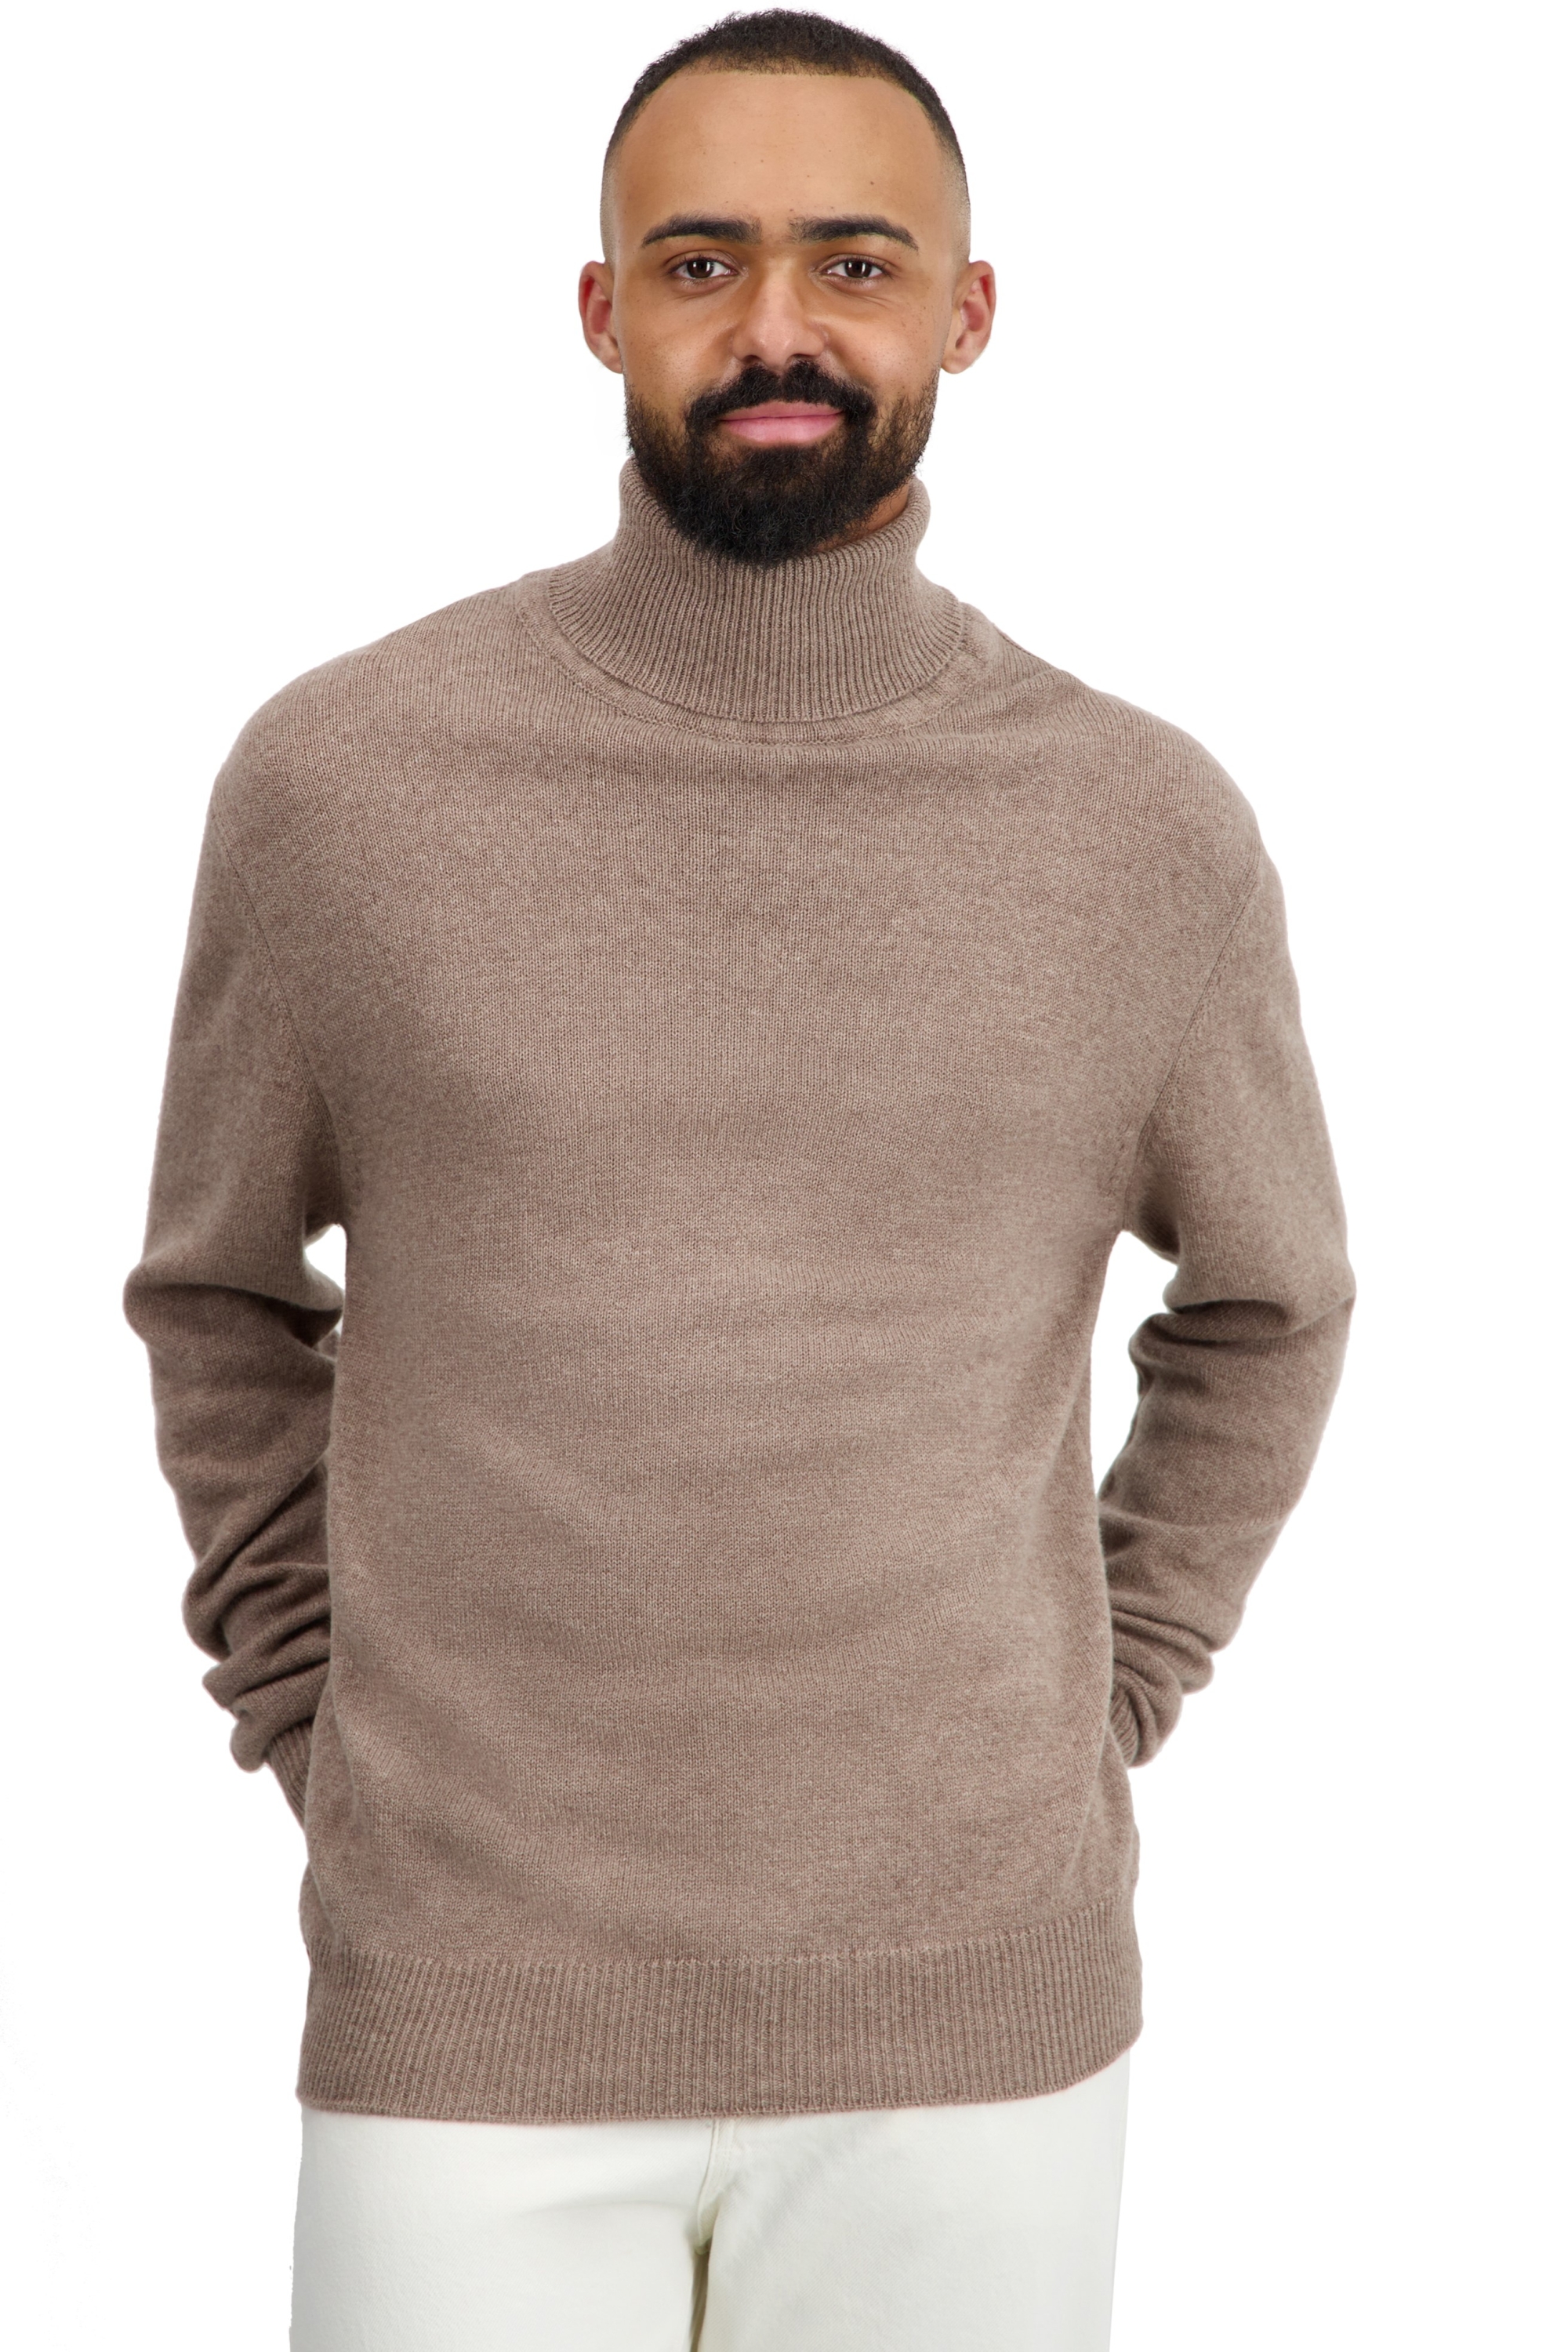 Cachemire pull homme col roule edgar 4f natural terra 2xl